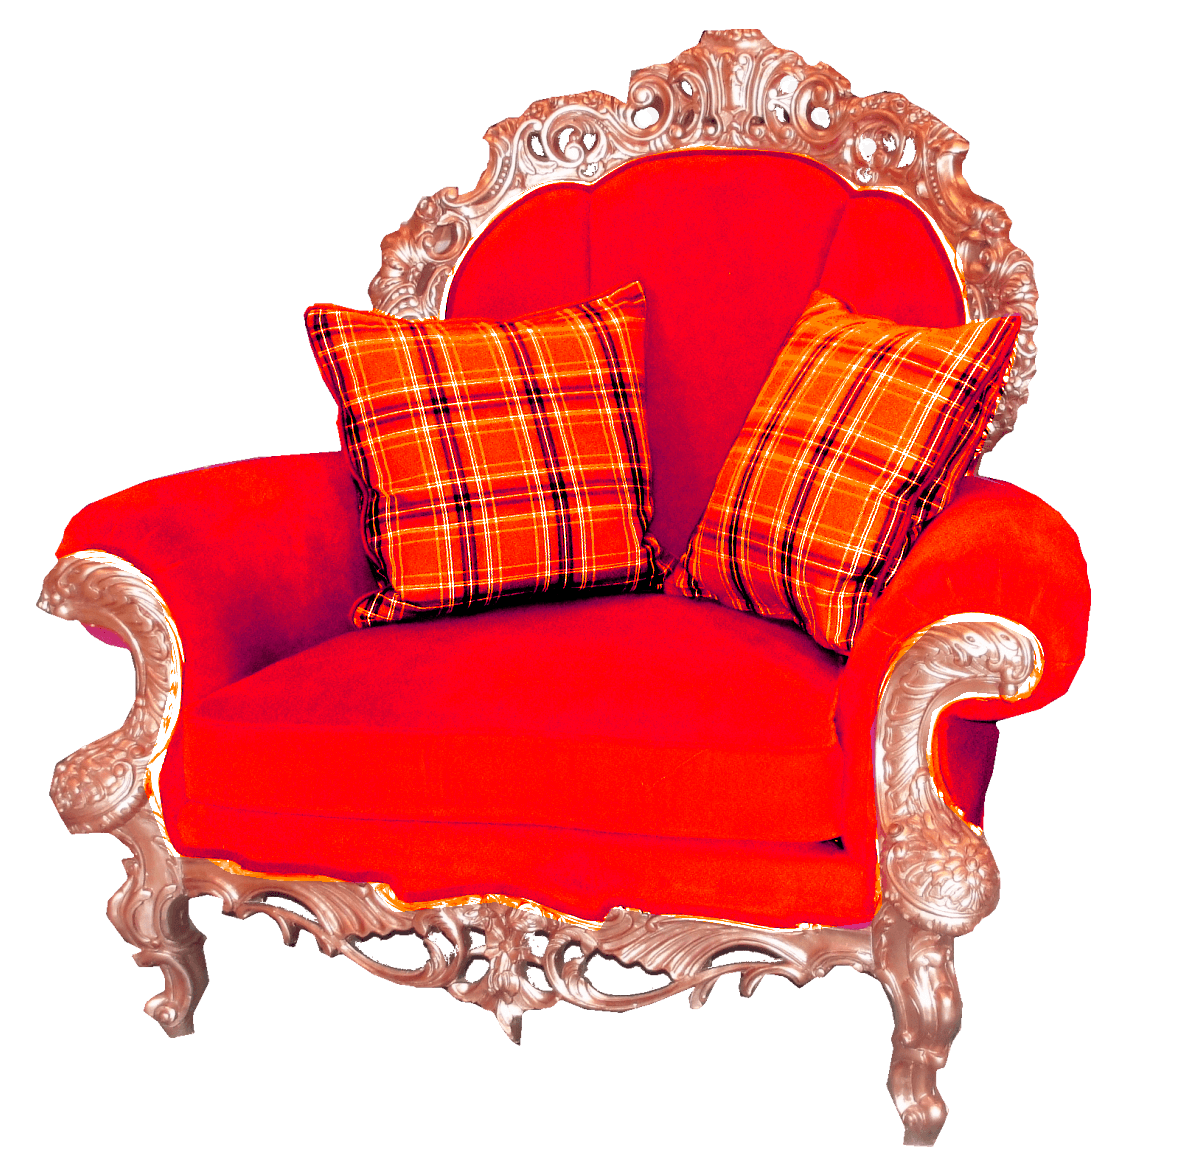 Red Armchair Png Image PNG Image